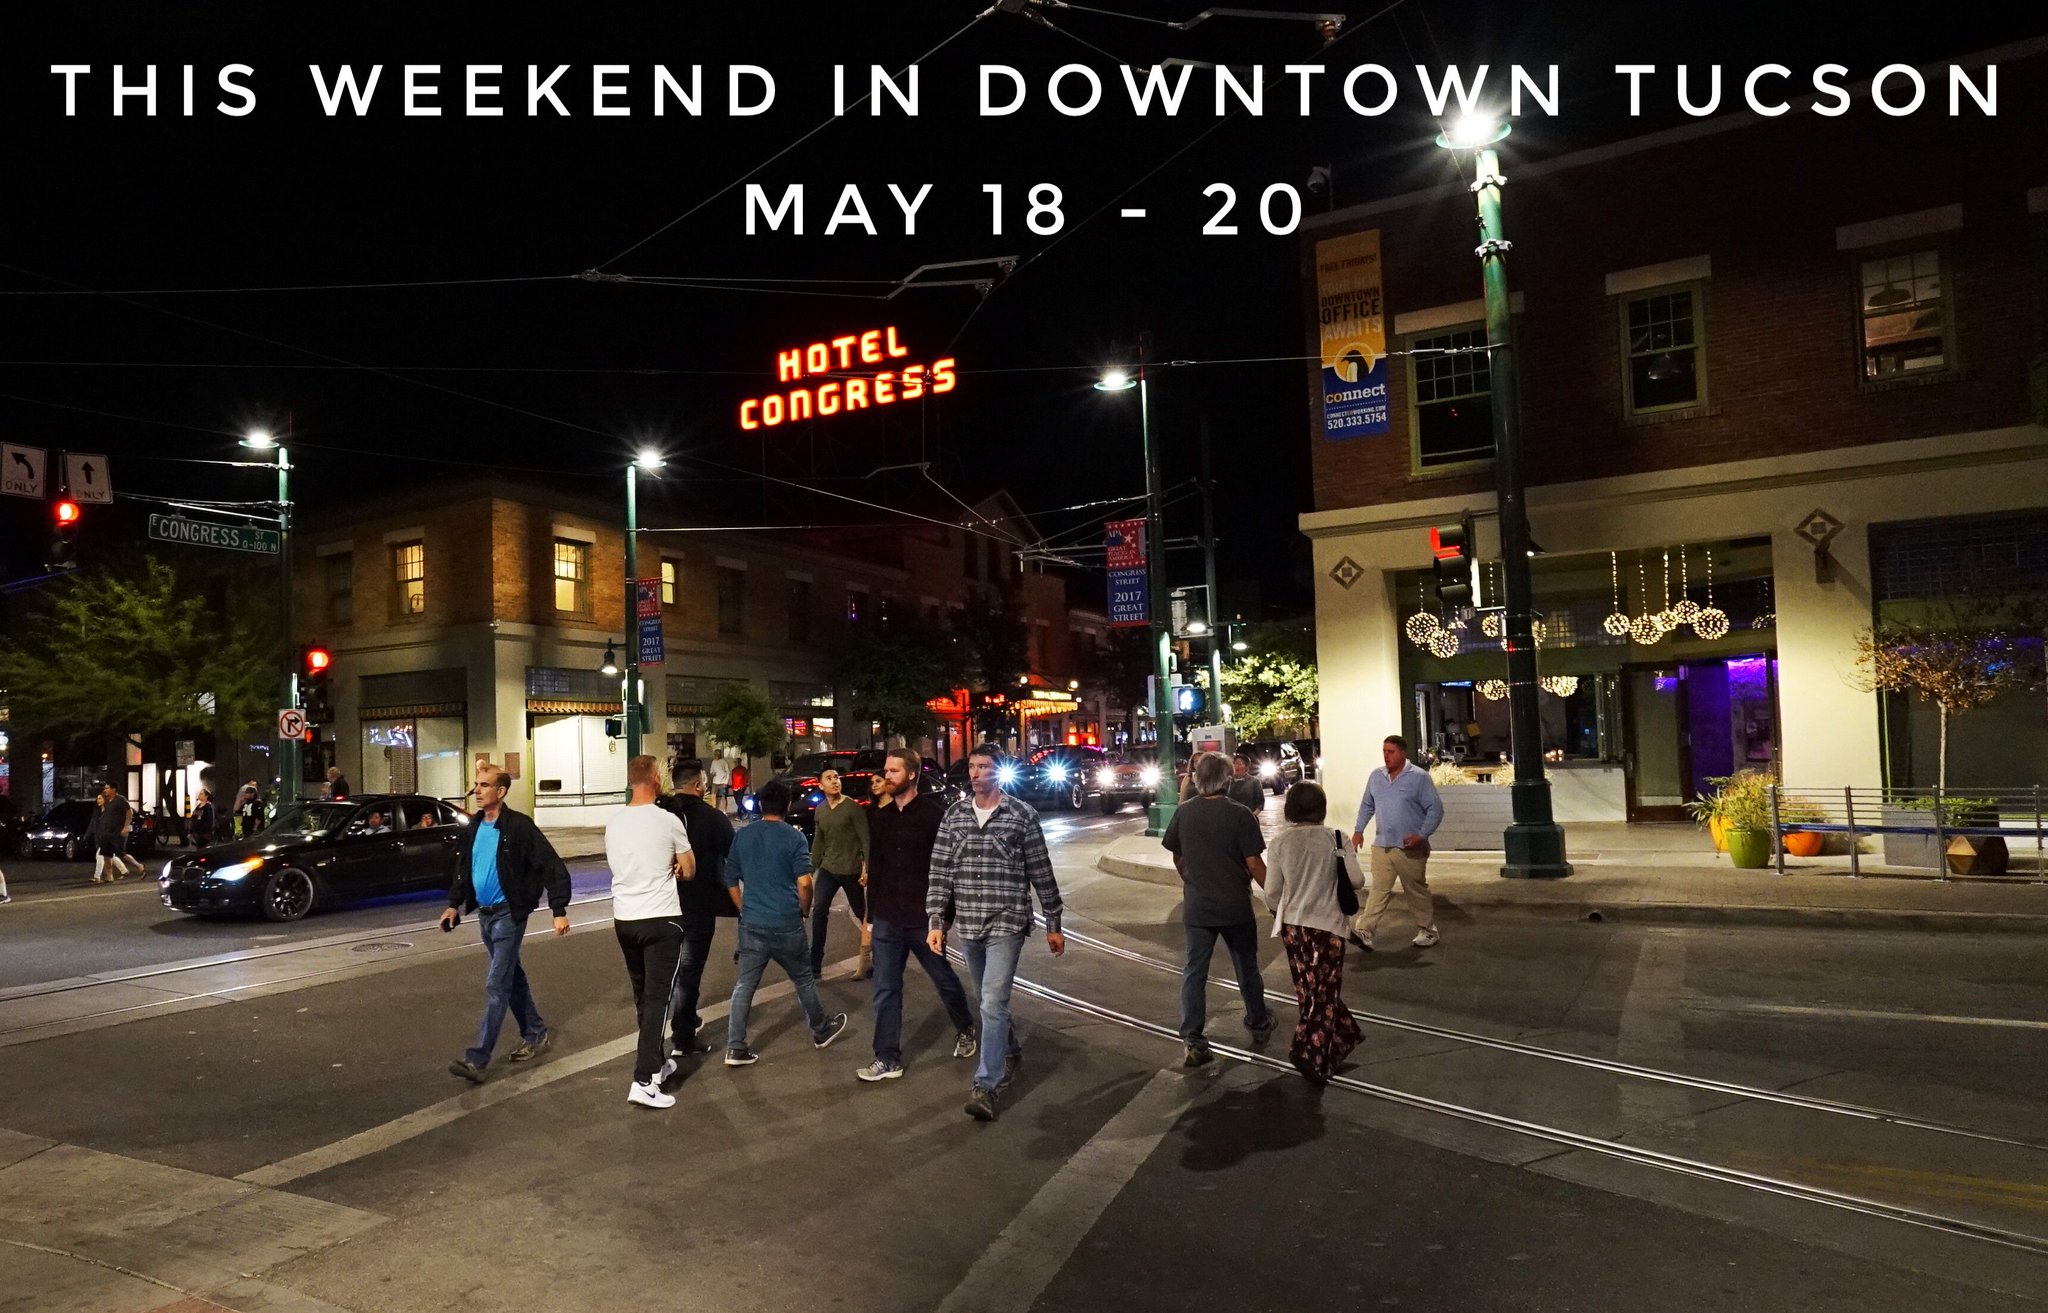 Downtown Tucson on Twitter: "There are many great happenings in